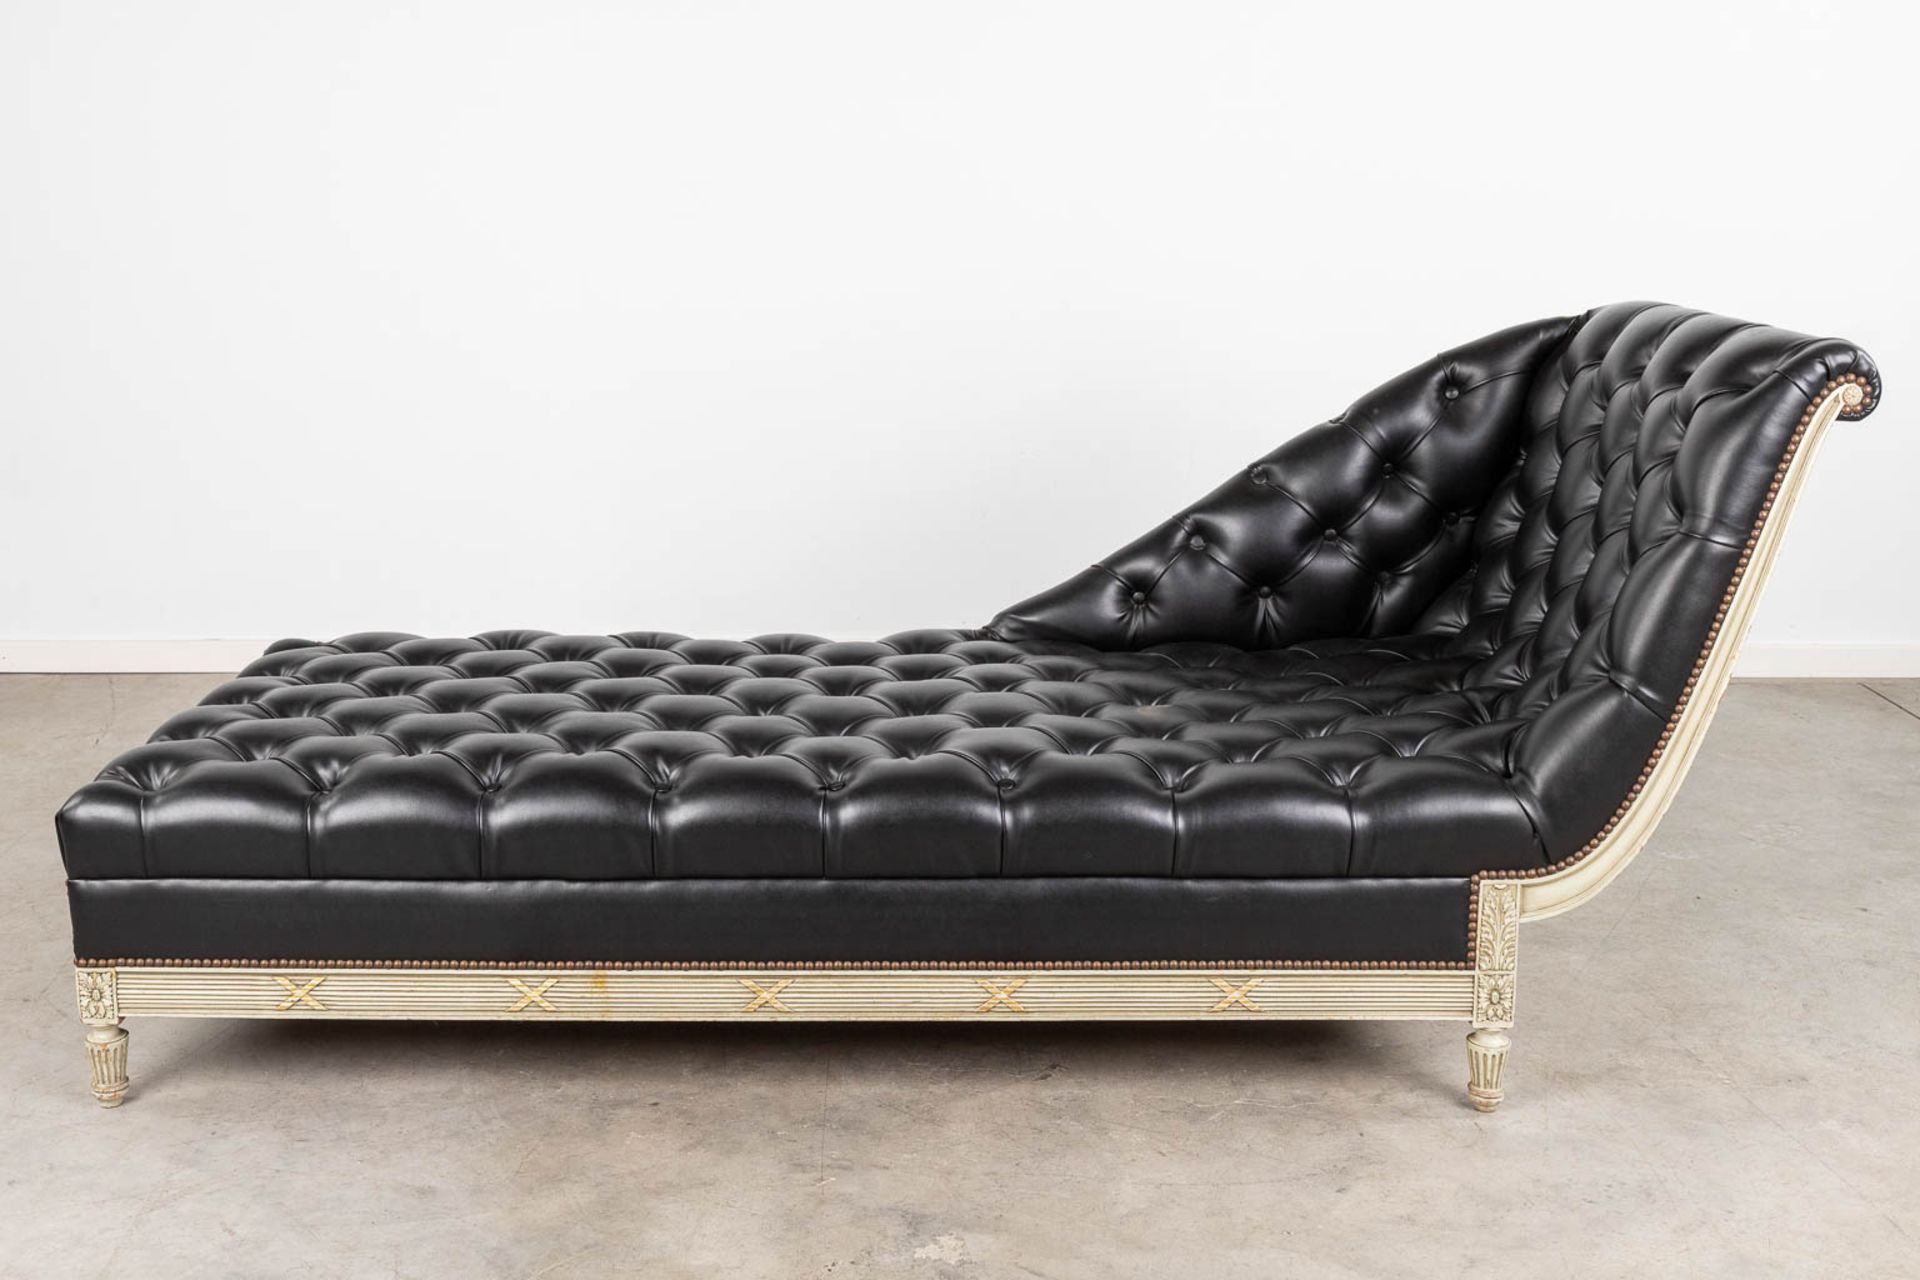 A white-patinated 'Chaise Longue', wood and leather in Louis XVI style. (L:76 x W:200 x H:87 cm) - Bild 3 aus 12